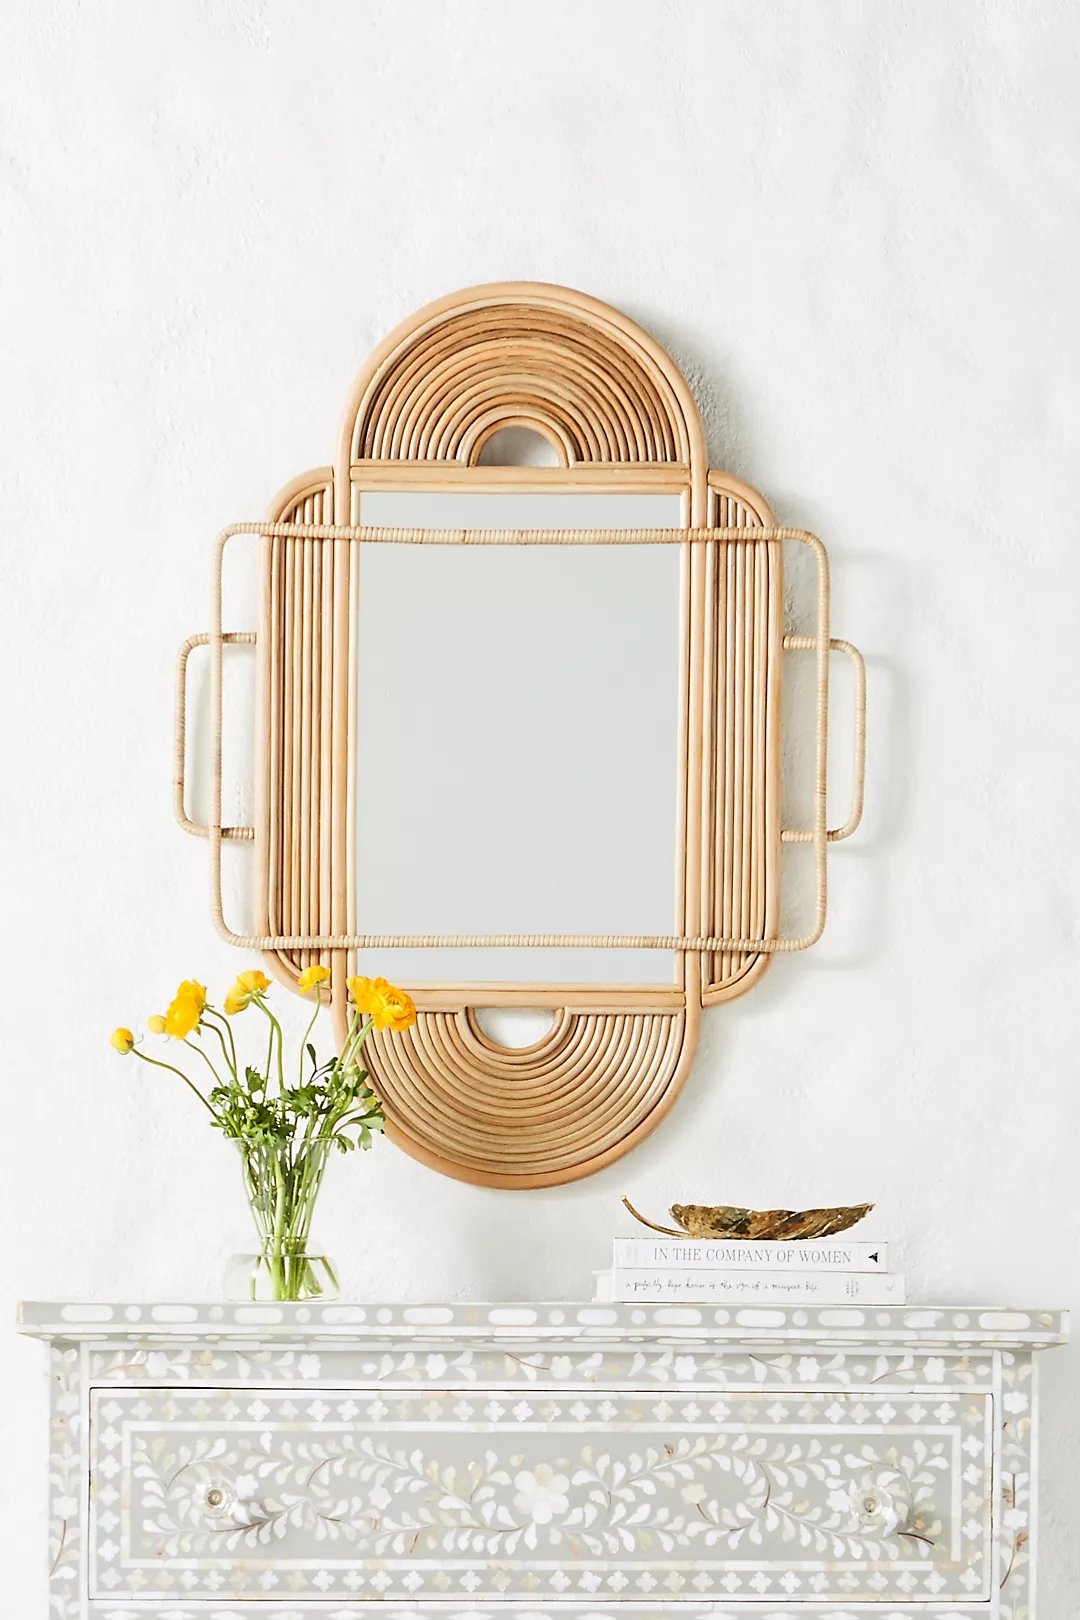 Sculpted Rattan Mirror - Image 1